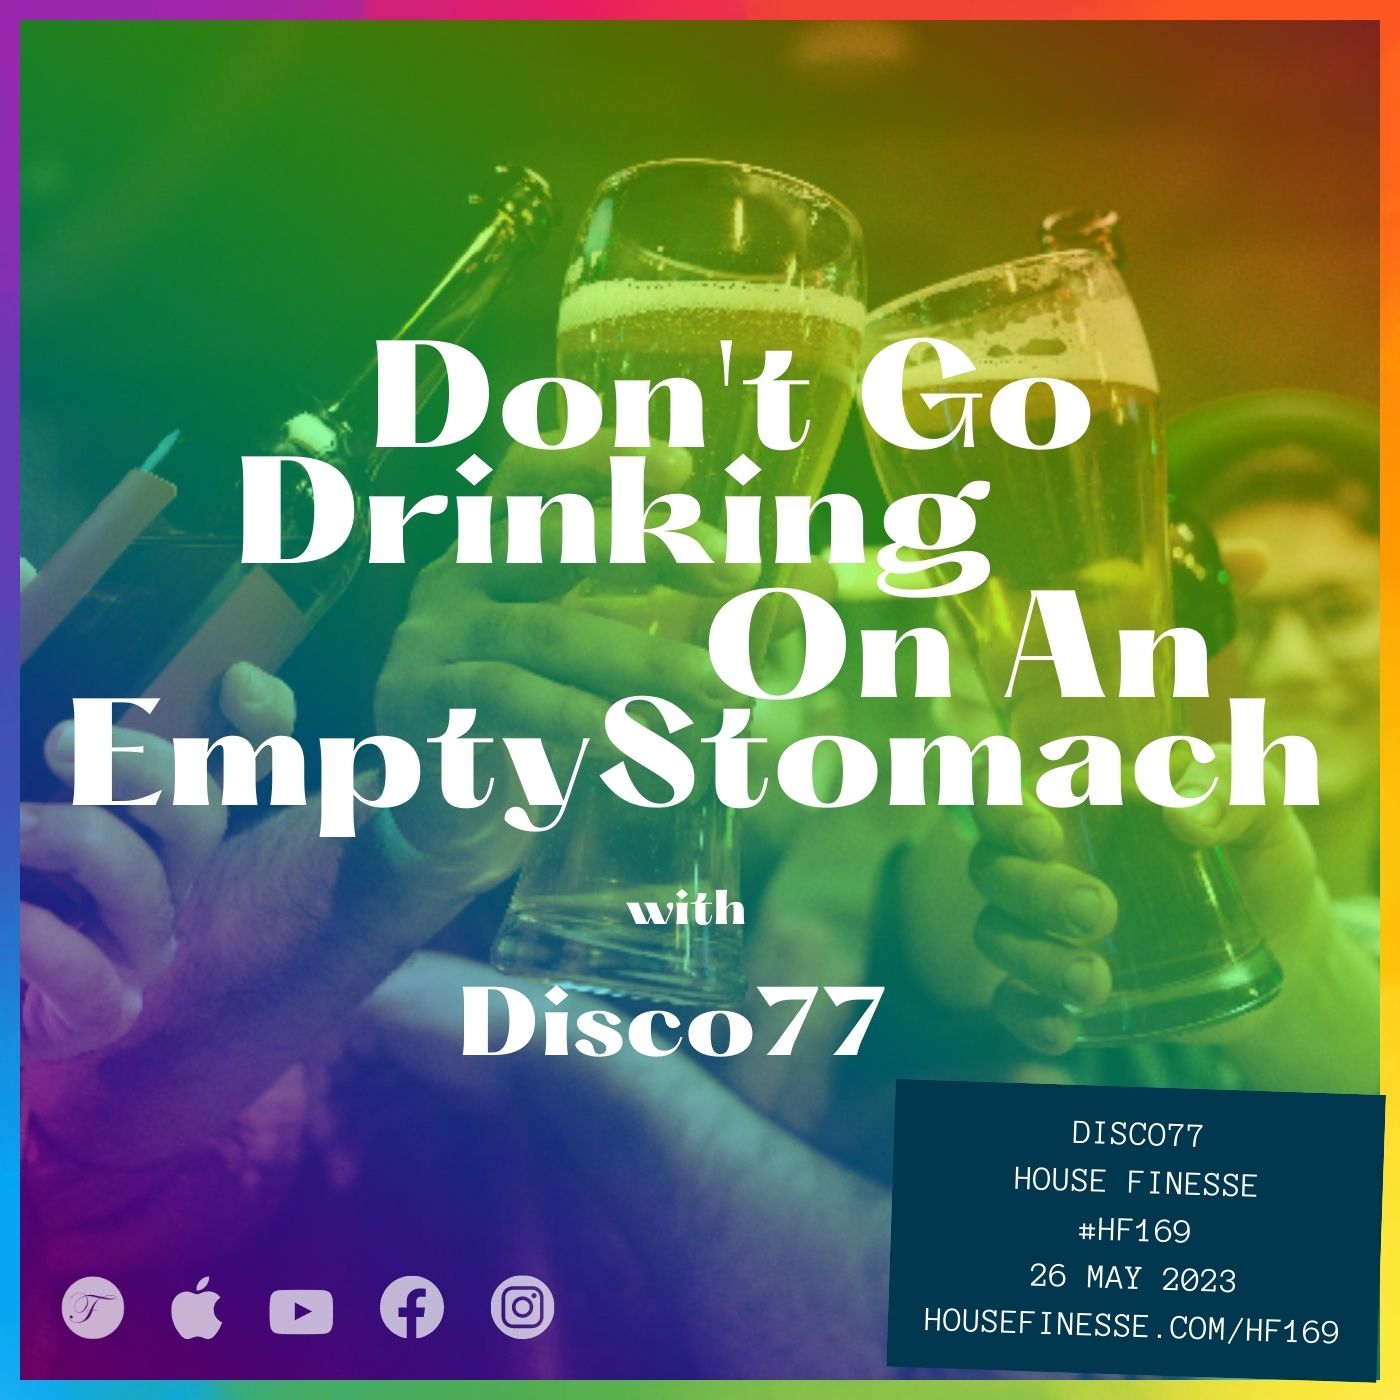 Don’t Go Drinking On An Empty Stomach with Disco77